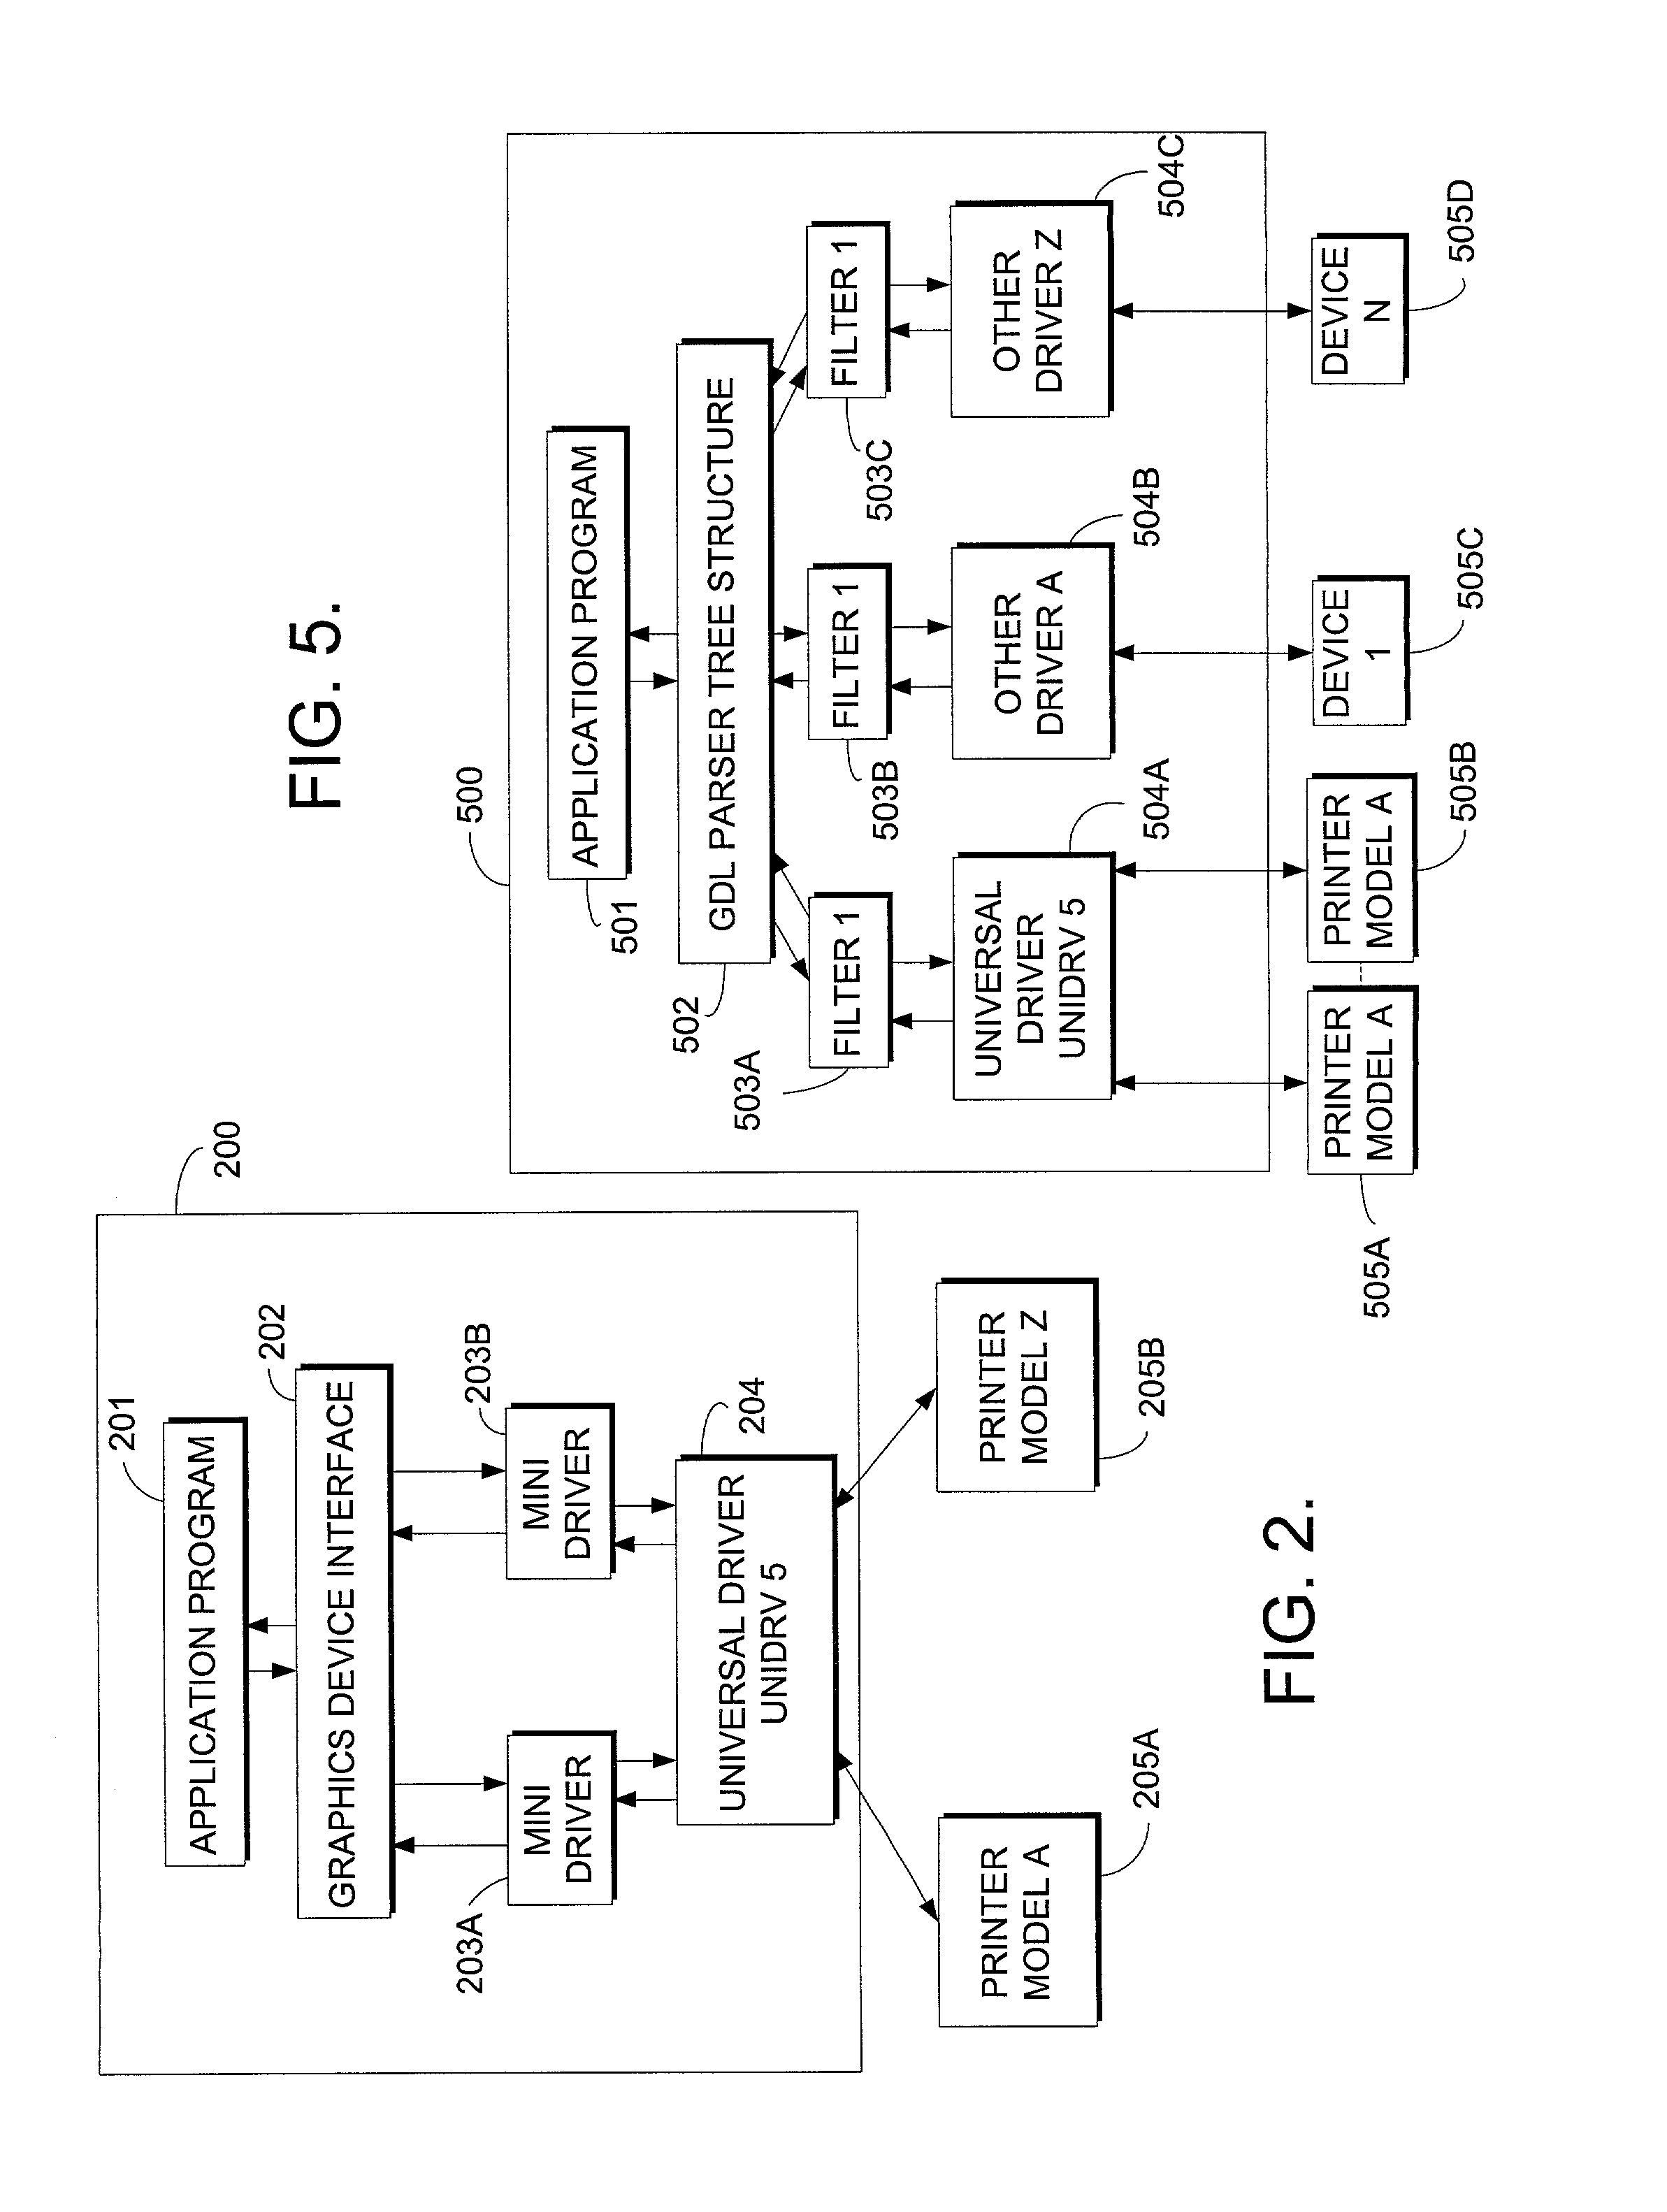 Method for generic object oriented description of structured data (GDL)